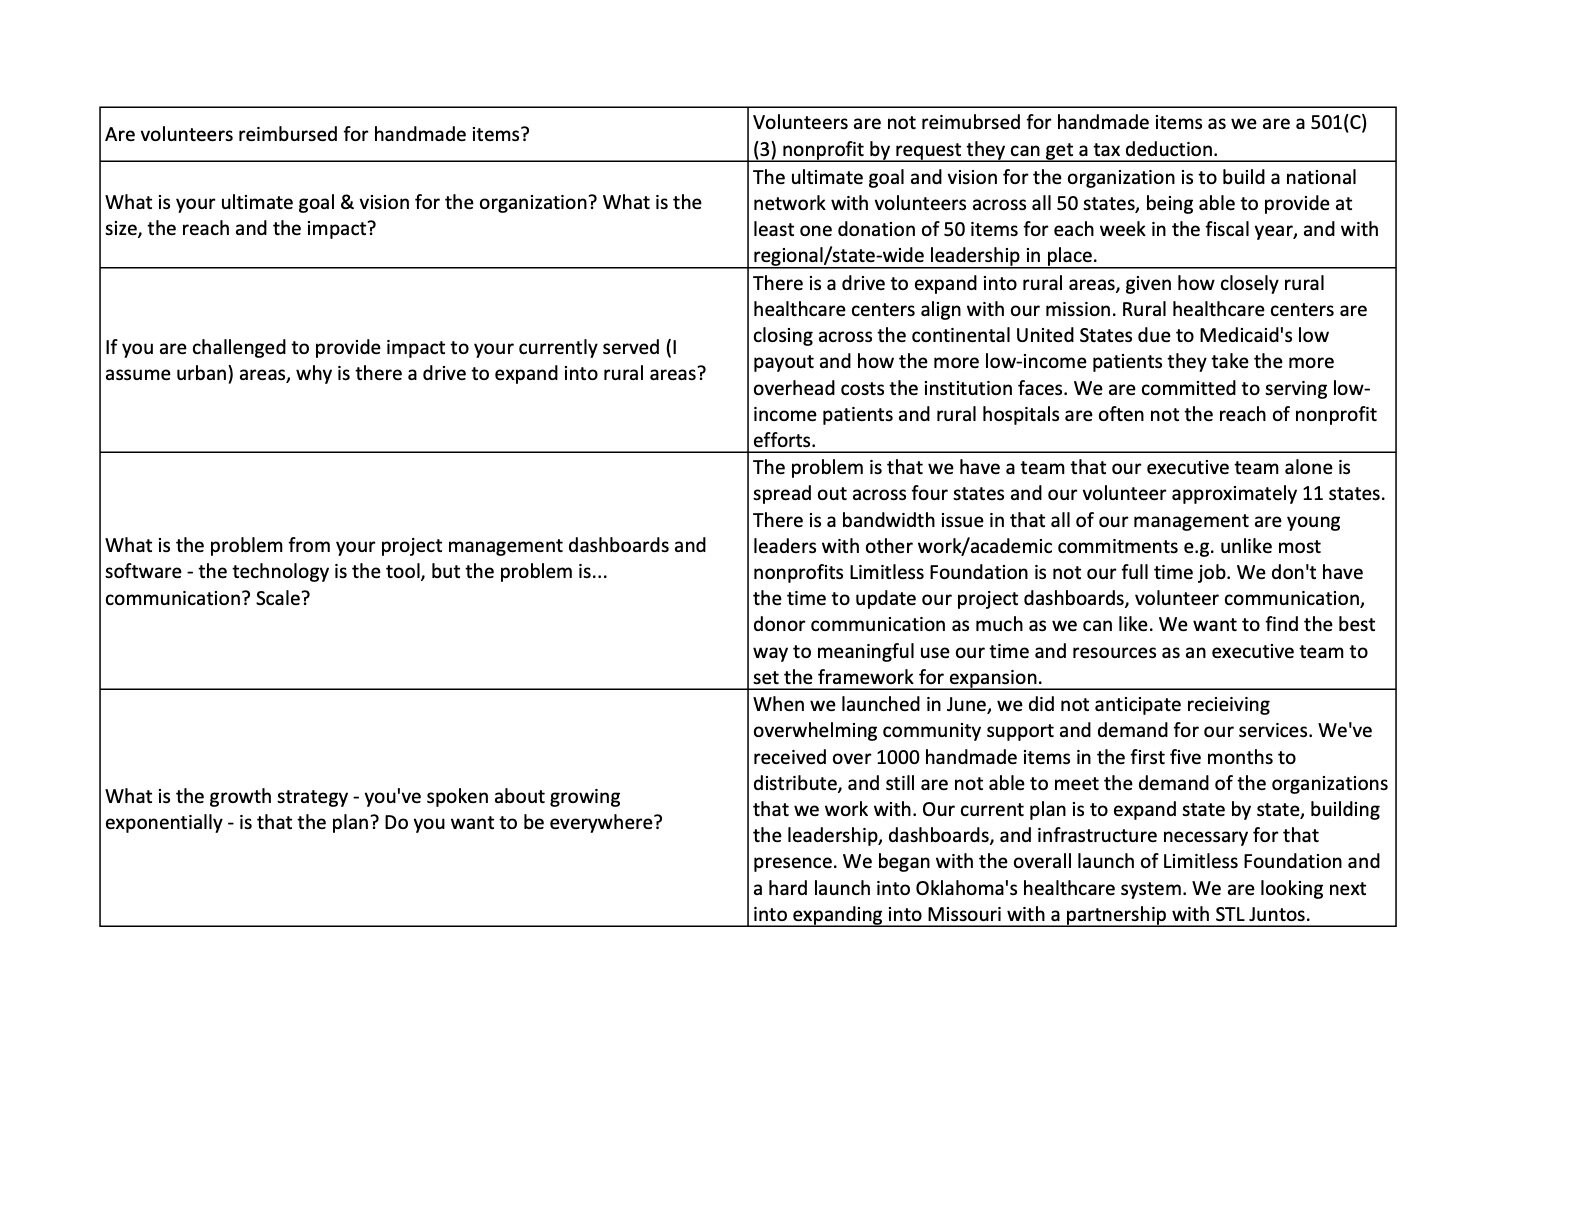 Answers to Questions for Limitless Foundation  - Sheet2.jpg